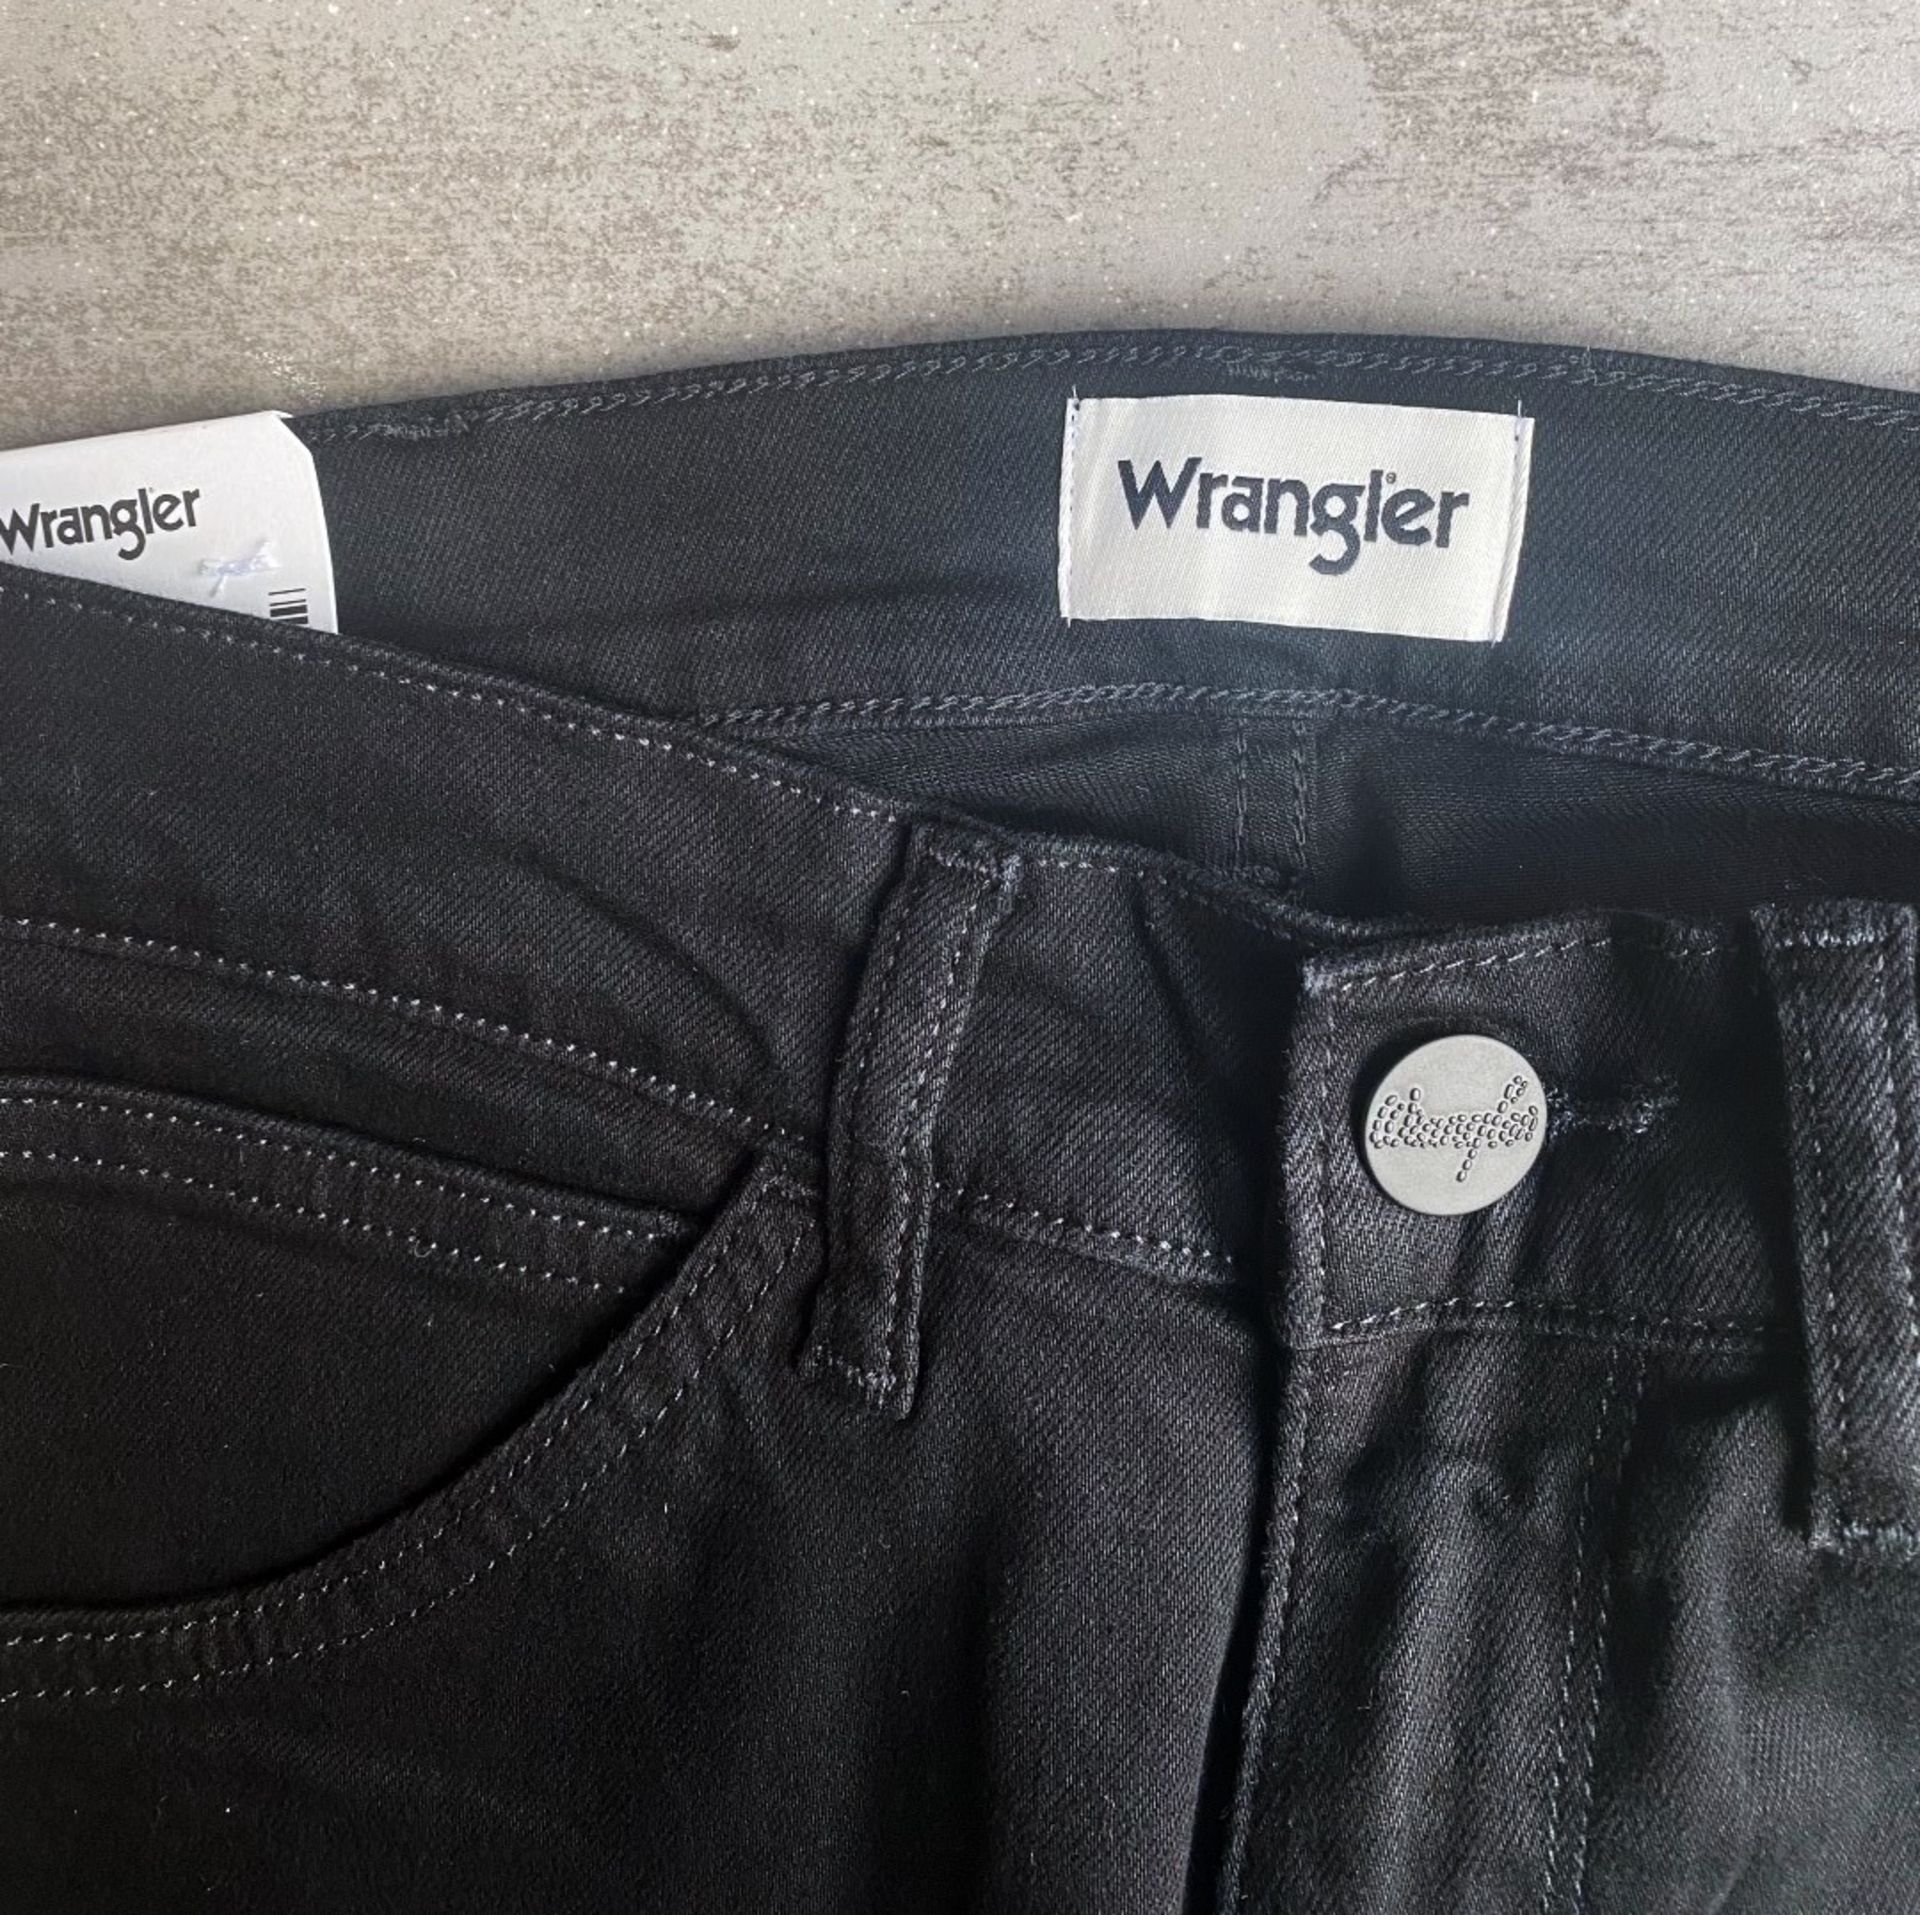 1 x Pair Of Men's Genuine Wrangler Jeans In Black - Size: 30/32 - Preowned, Like New With Tags - - Image 4 of 10